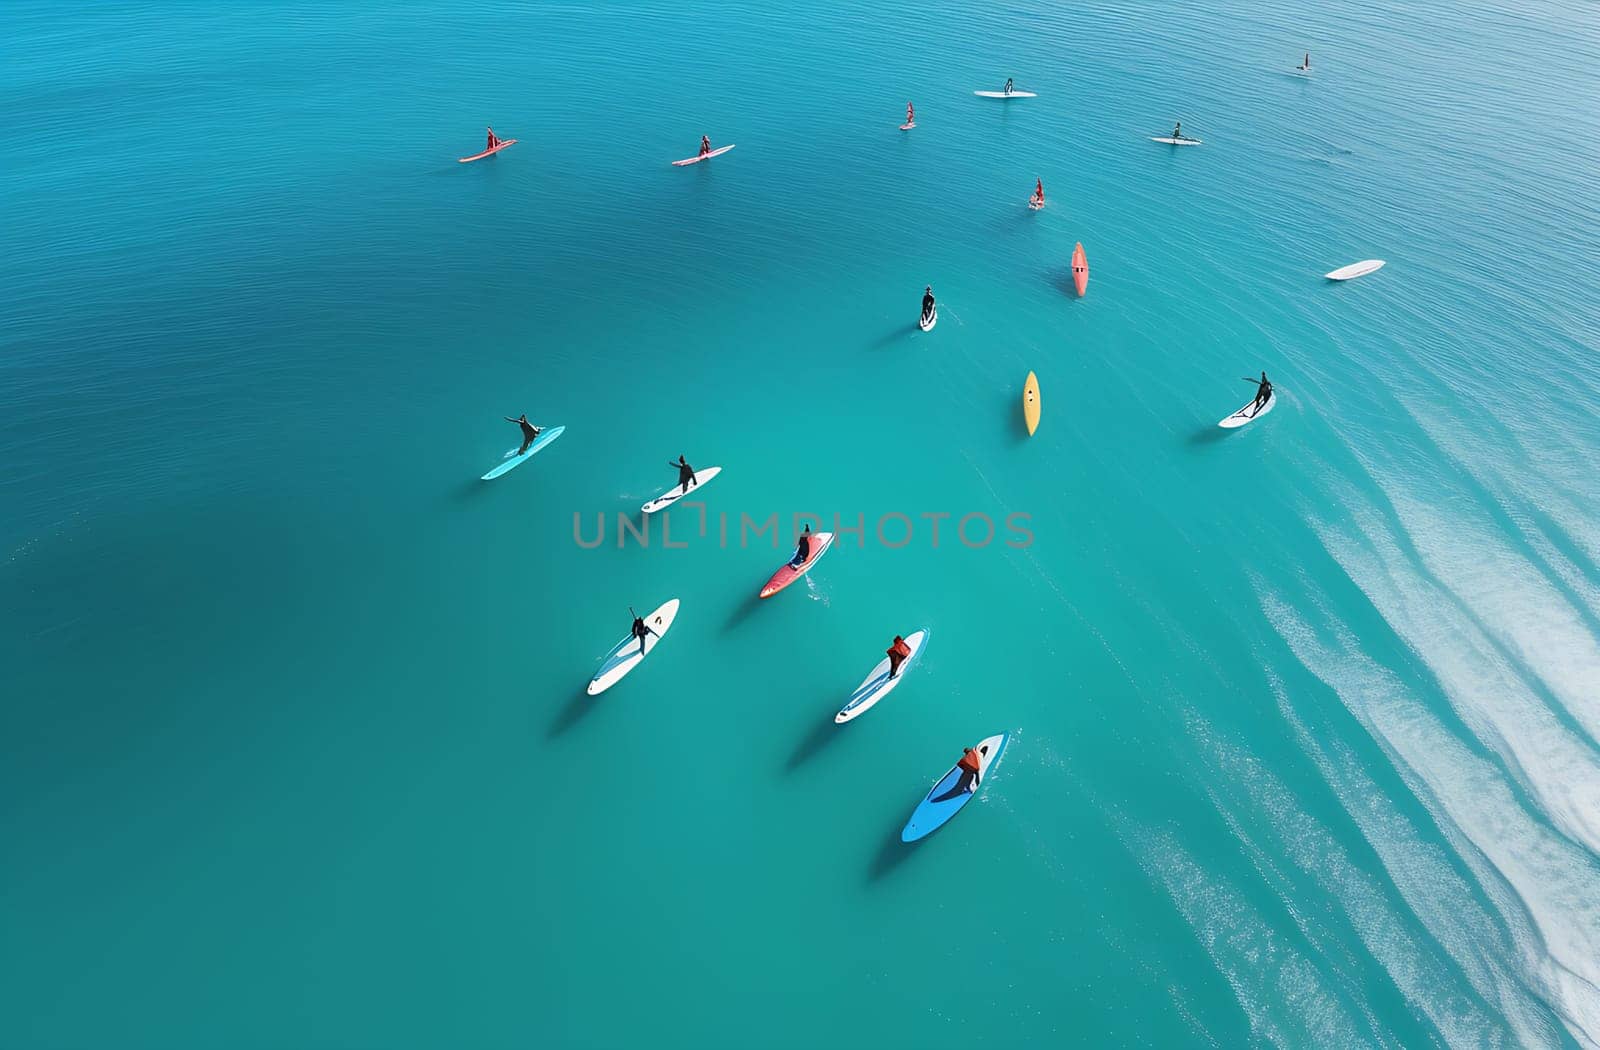 A group of people practice yoga on a sup board in the calm sea in the early morning, combining the tranquility of yoga with the excitement of surfing.